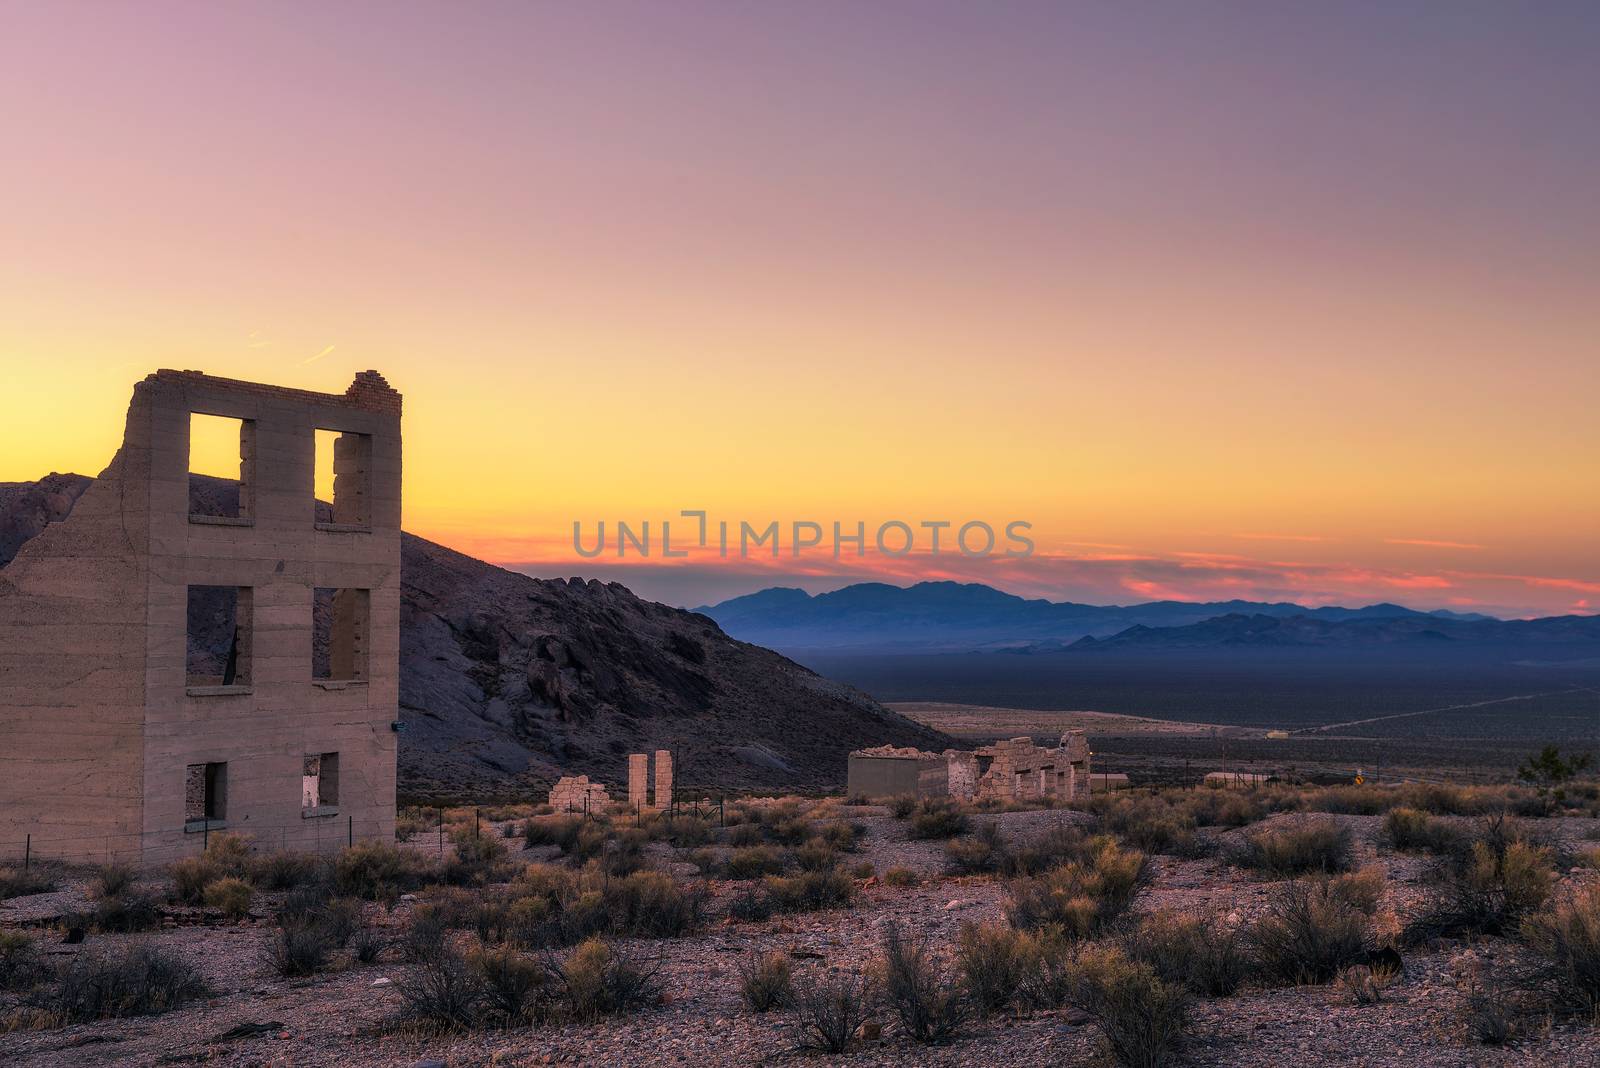 Sunrise above abandoned building in Rhyolite, Nevada by nickfox